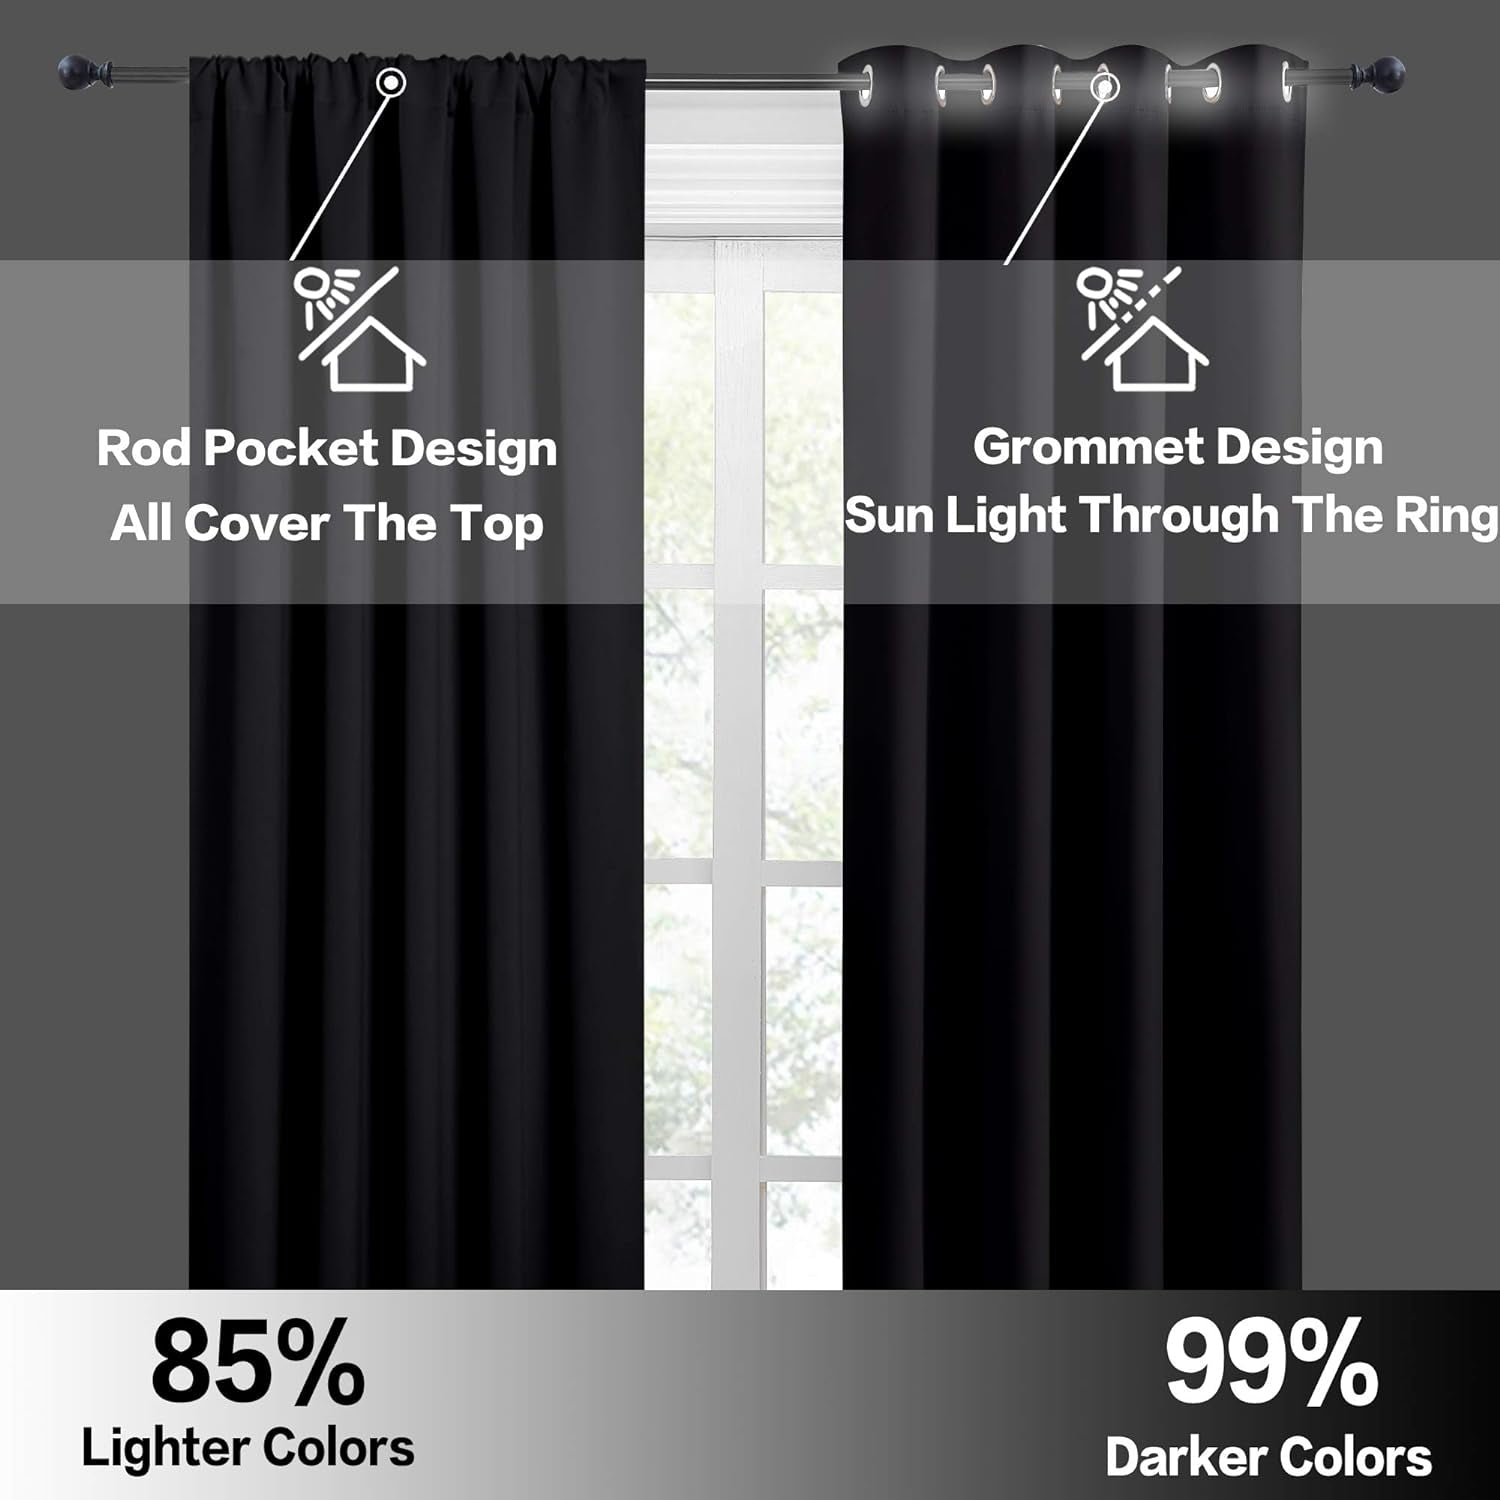 RYB HOME Blackout Curtains for Bedroom - Solid Light Block Blinds Privacy Noise Reduce Drapes for Kids Nursery Laundry Kitchen Cafe Window Decor, W 52 X L 36 Inch per Panel, Black, 1 Pair  RYB HOME   